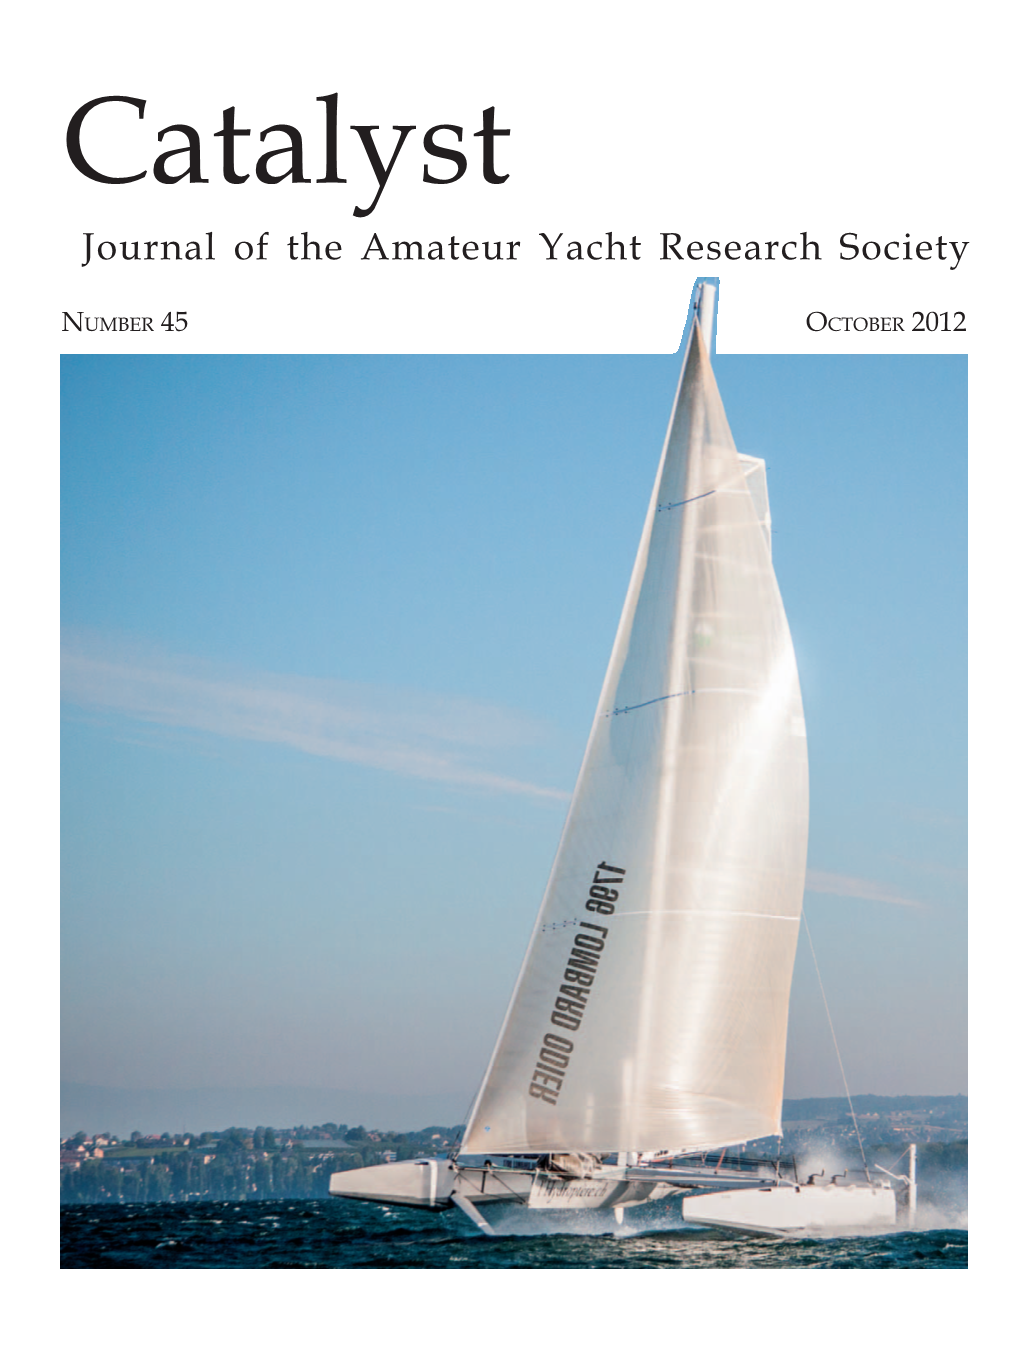 Journal of the Amateur Yacht Research Society